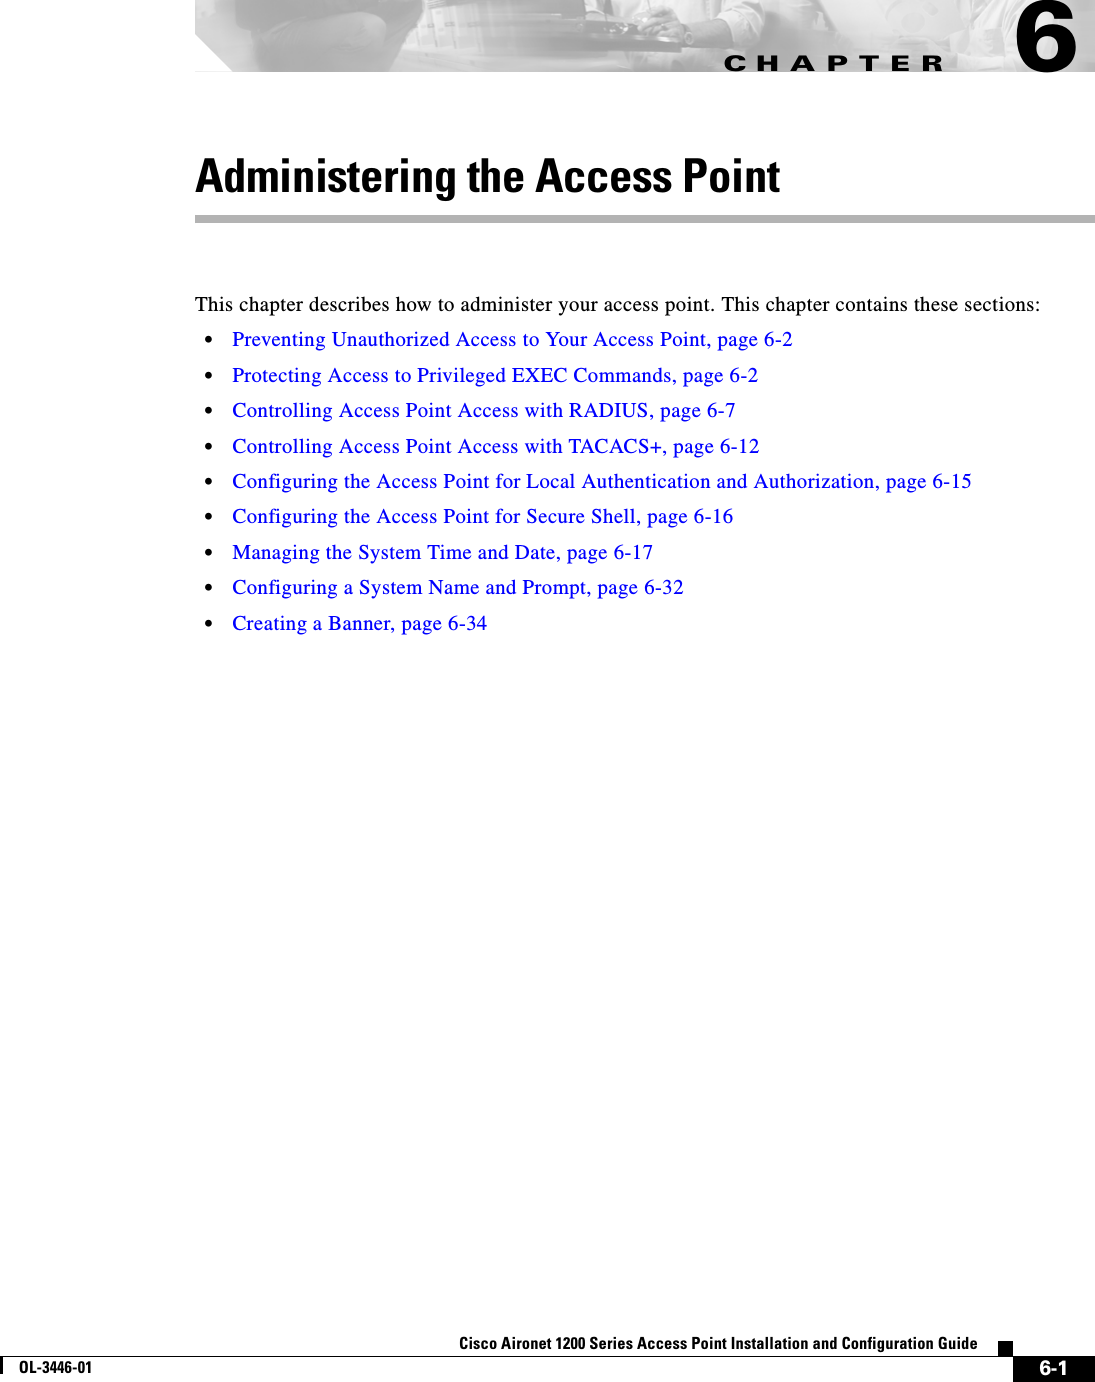 CHAPTER6-1Cisco Aironet 1200 Series Access Point Installation and Configuration GuideOL-3446-016Administering the Access PointThis chapter describes how to administer your access point. This chapter contains these sections:•Preventing Unauthorized Access to Your Access Point, page 6-2•Protecting Access to Privileged EXEC Commands, page 6-2•Controlling Access Point Access with RADIUS, page 6-7•Controlling Access Point Access with TACACS+, page 6-12•Configuring the Access Point for Local Authentication and Authorization, page 6-15•Configuring the Access Point for Secure Shell, page 6-16•Managing the System Time and Date, page 6-17•Configuring a System Name and Prompt, page 6-32•Creating a Banner, page 6-34